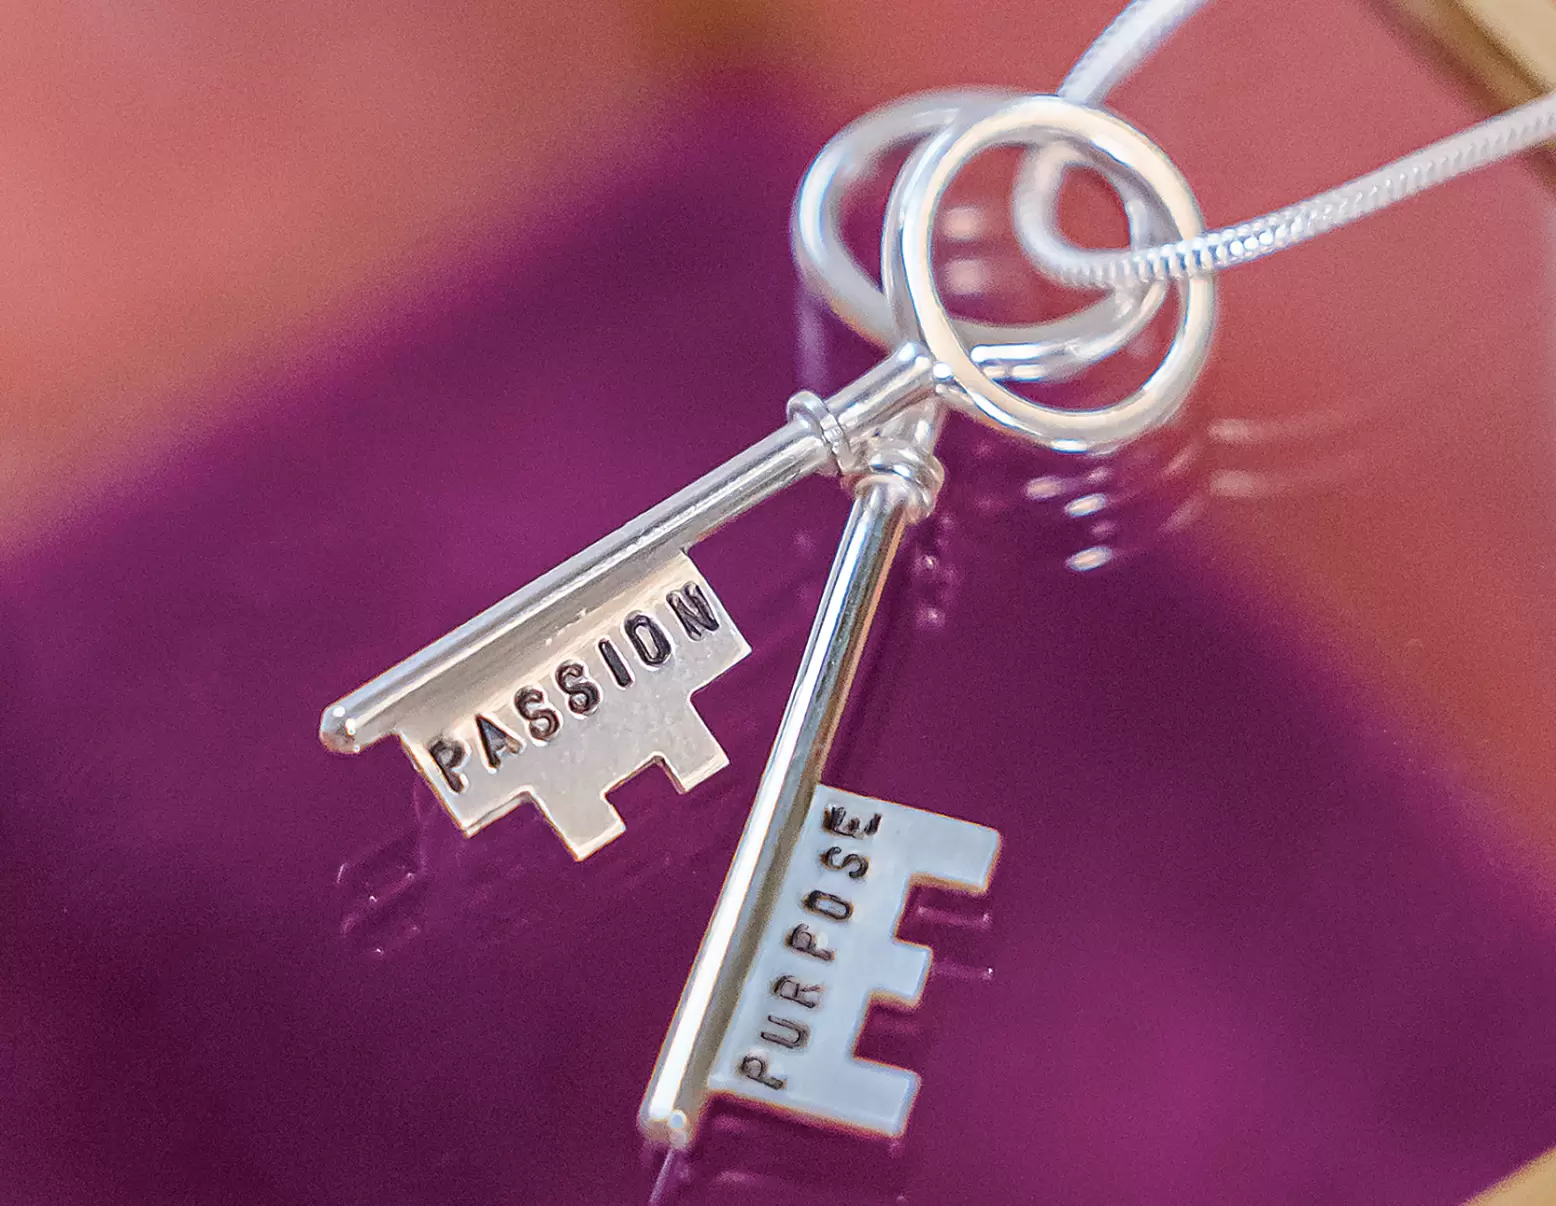 Passion and Purpose key necklace seen against a purple and pink background.